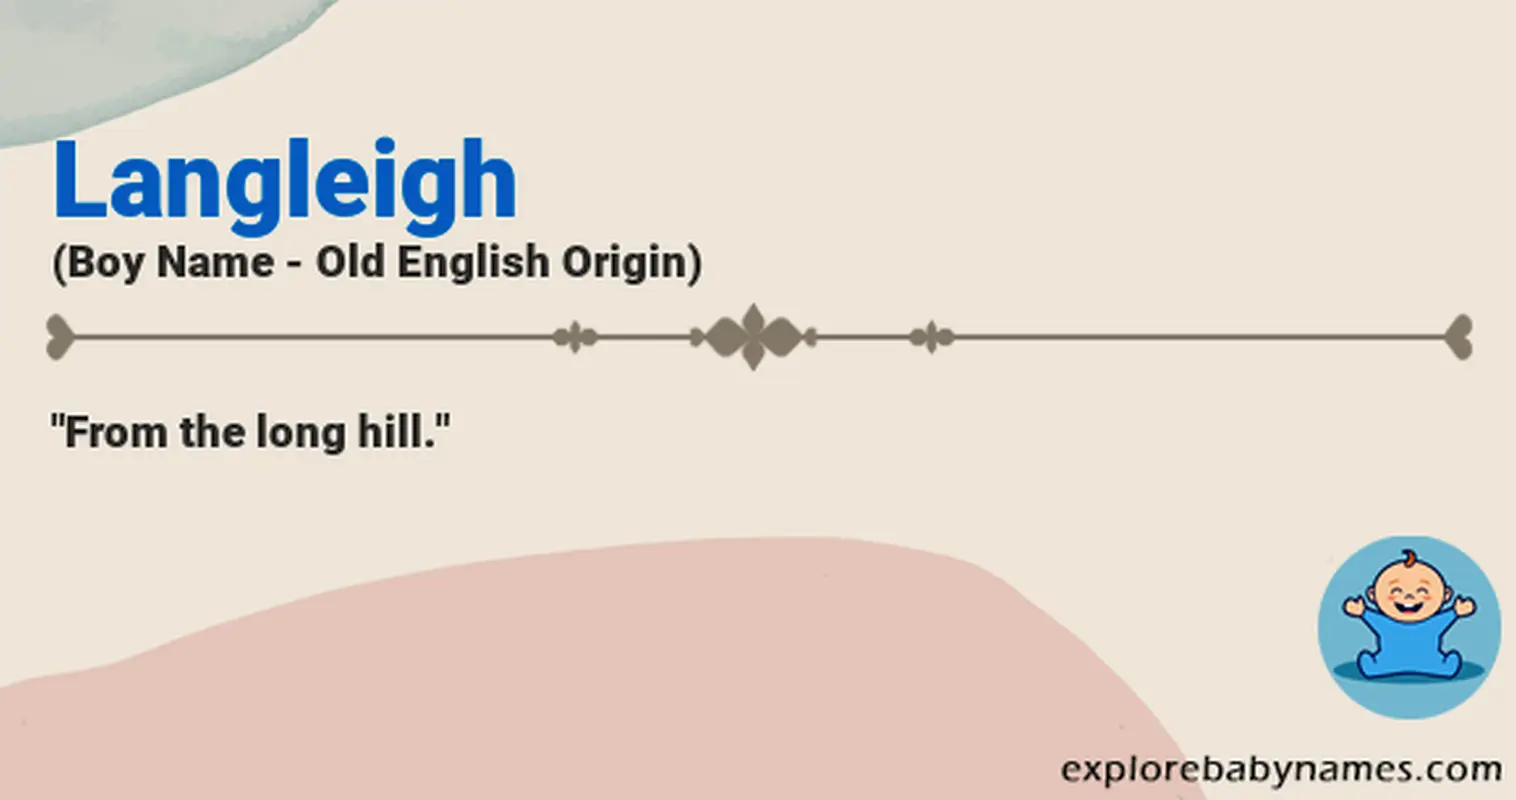 Meaning of Langleigh